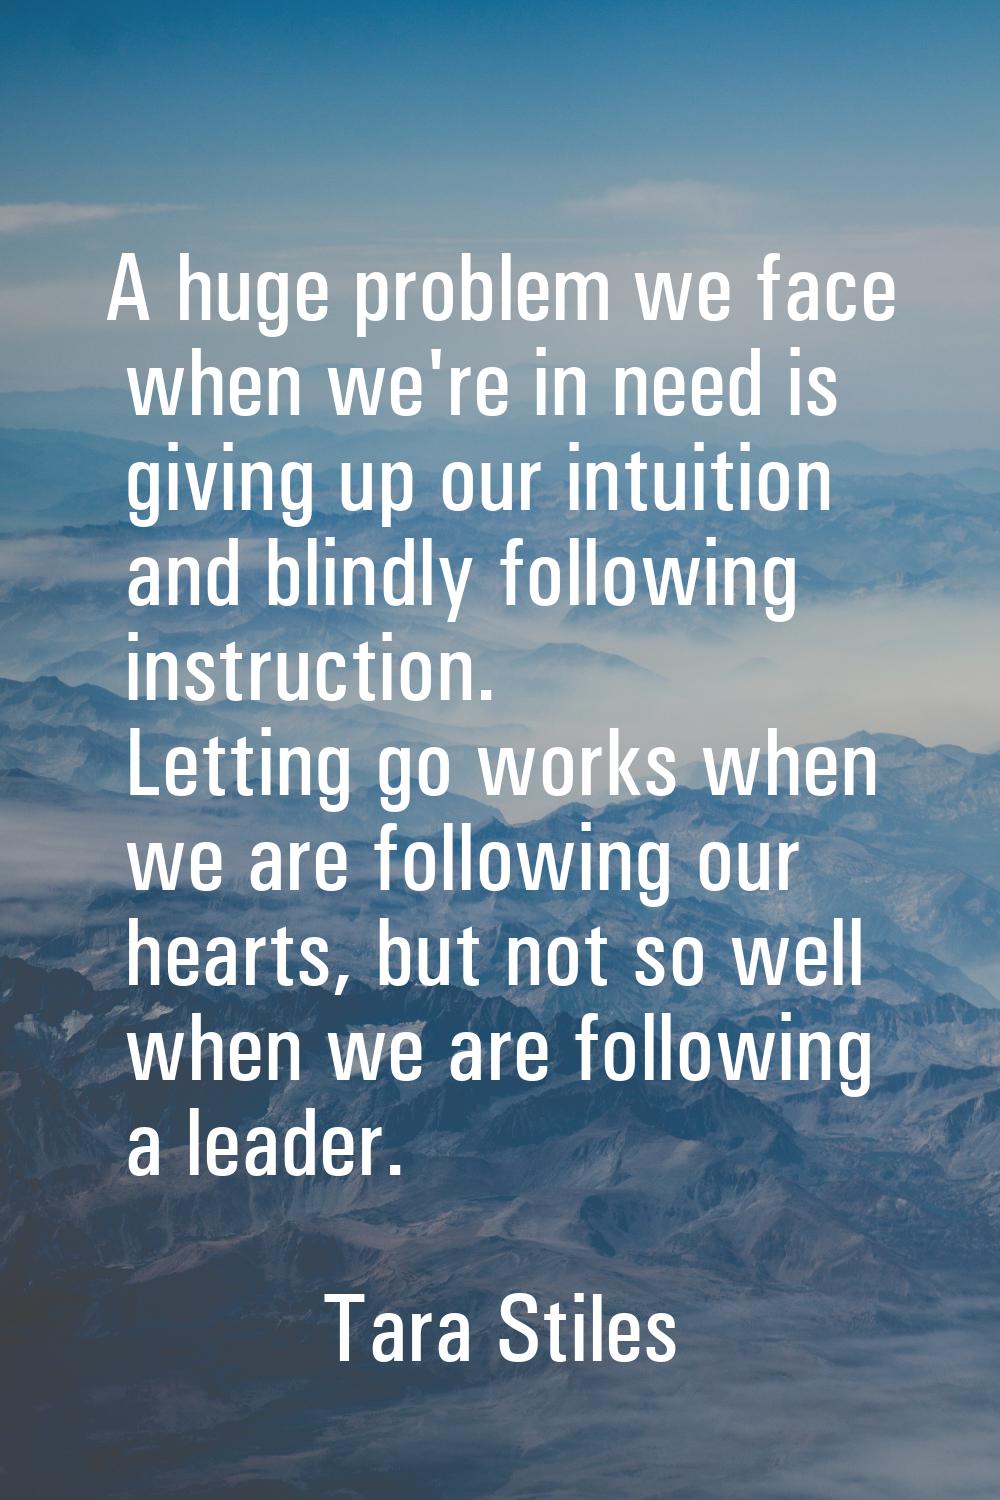 A huge problem we face when we're in need is giving up our intuition and blindly following instruct